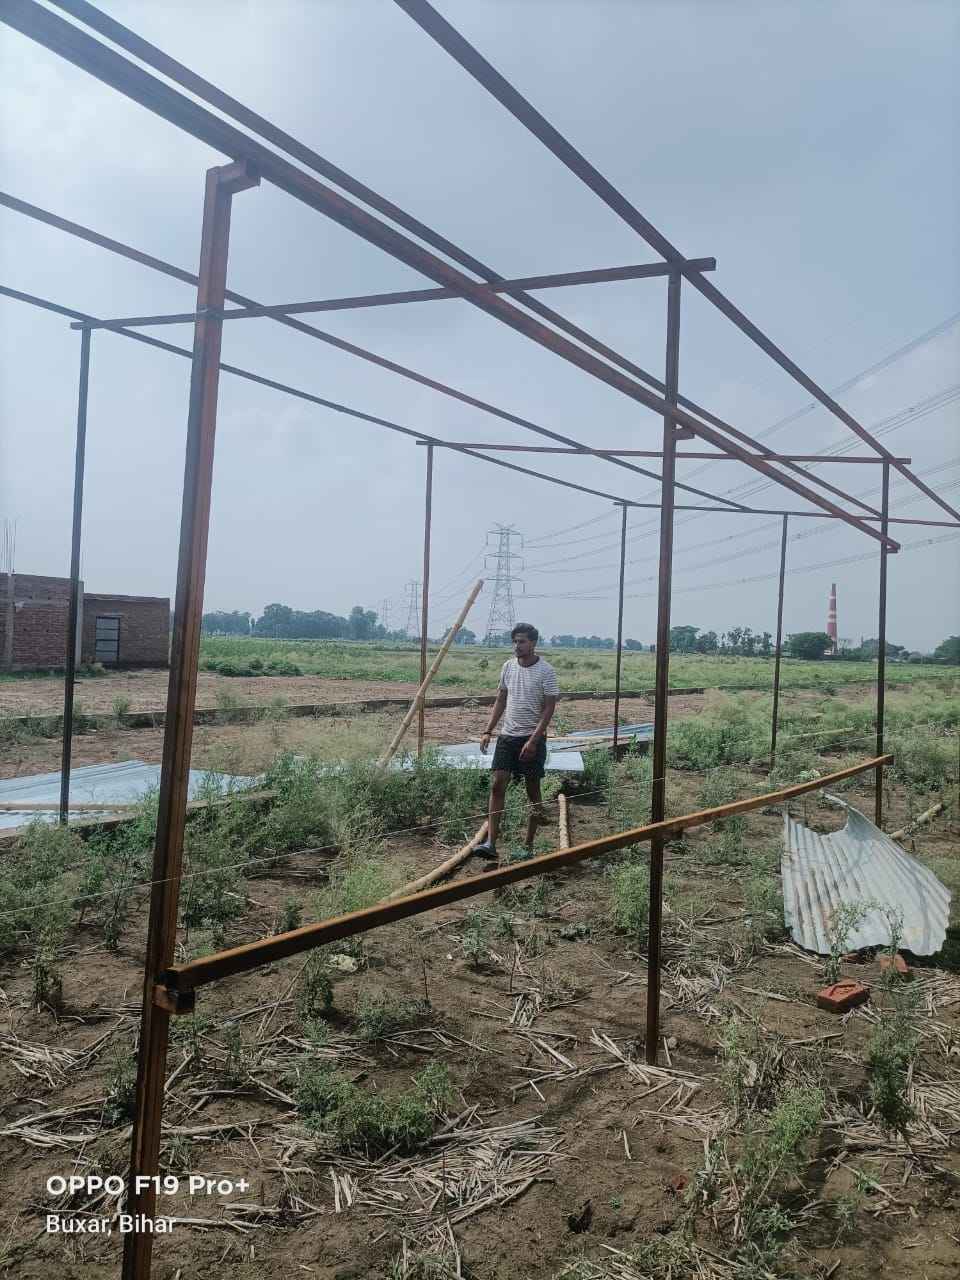 The animal rescue centre built with bamboo sticks by Hariom Chaubey in Bihar